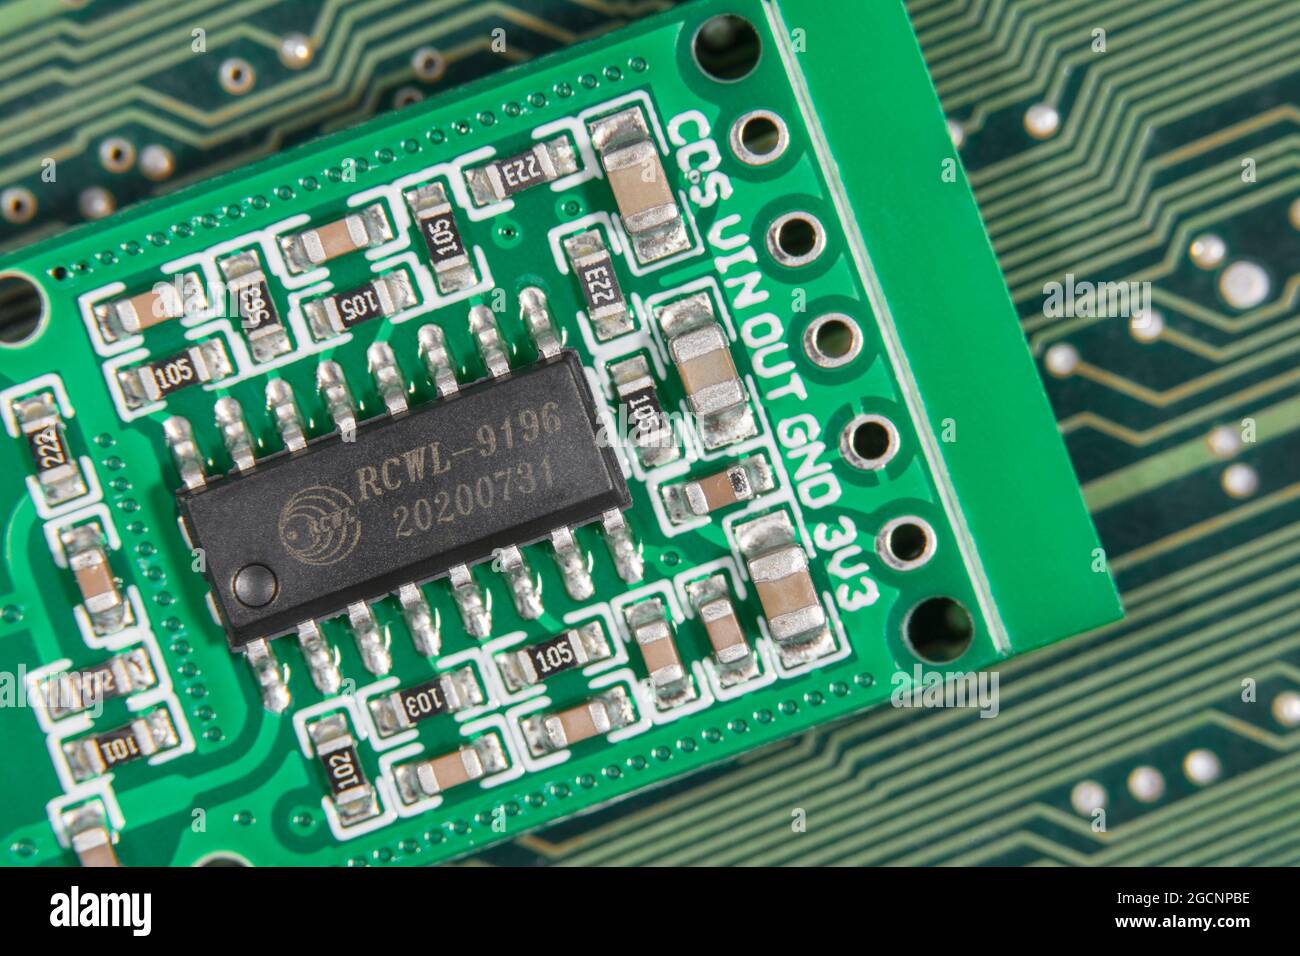 Macro close-up IC chip on small motion sensor circuit board pcb. Focus on RCWL-0516 lettering. Chip is a transmission signal processing control chip. Stock Photo